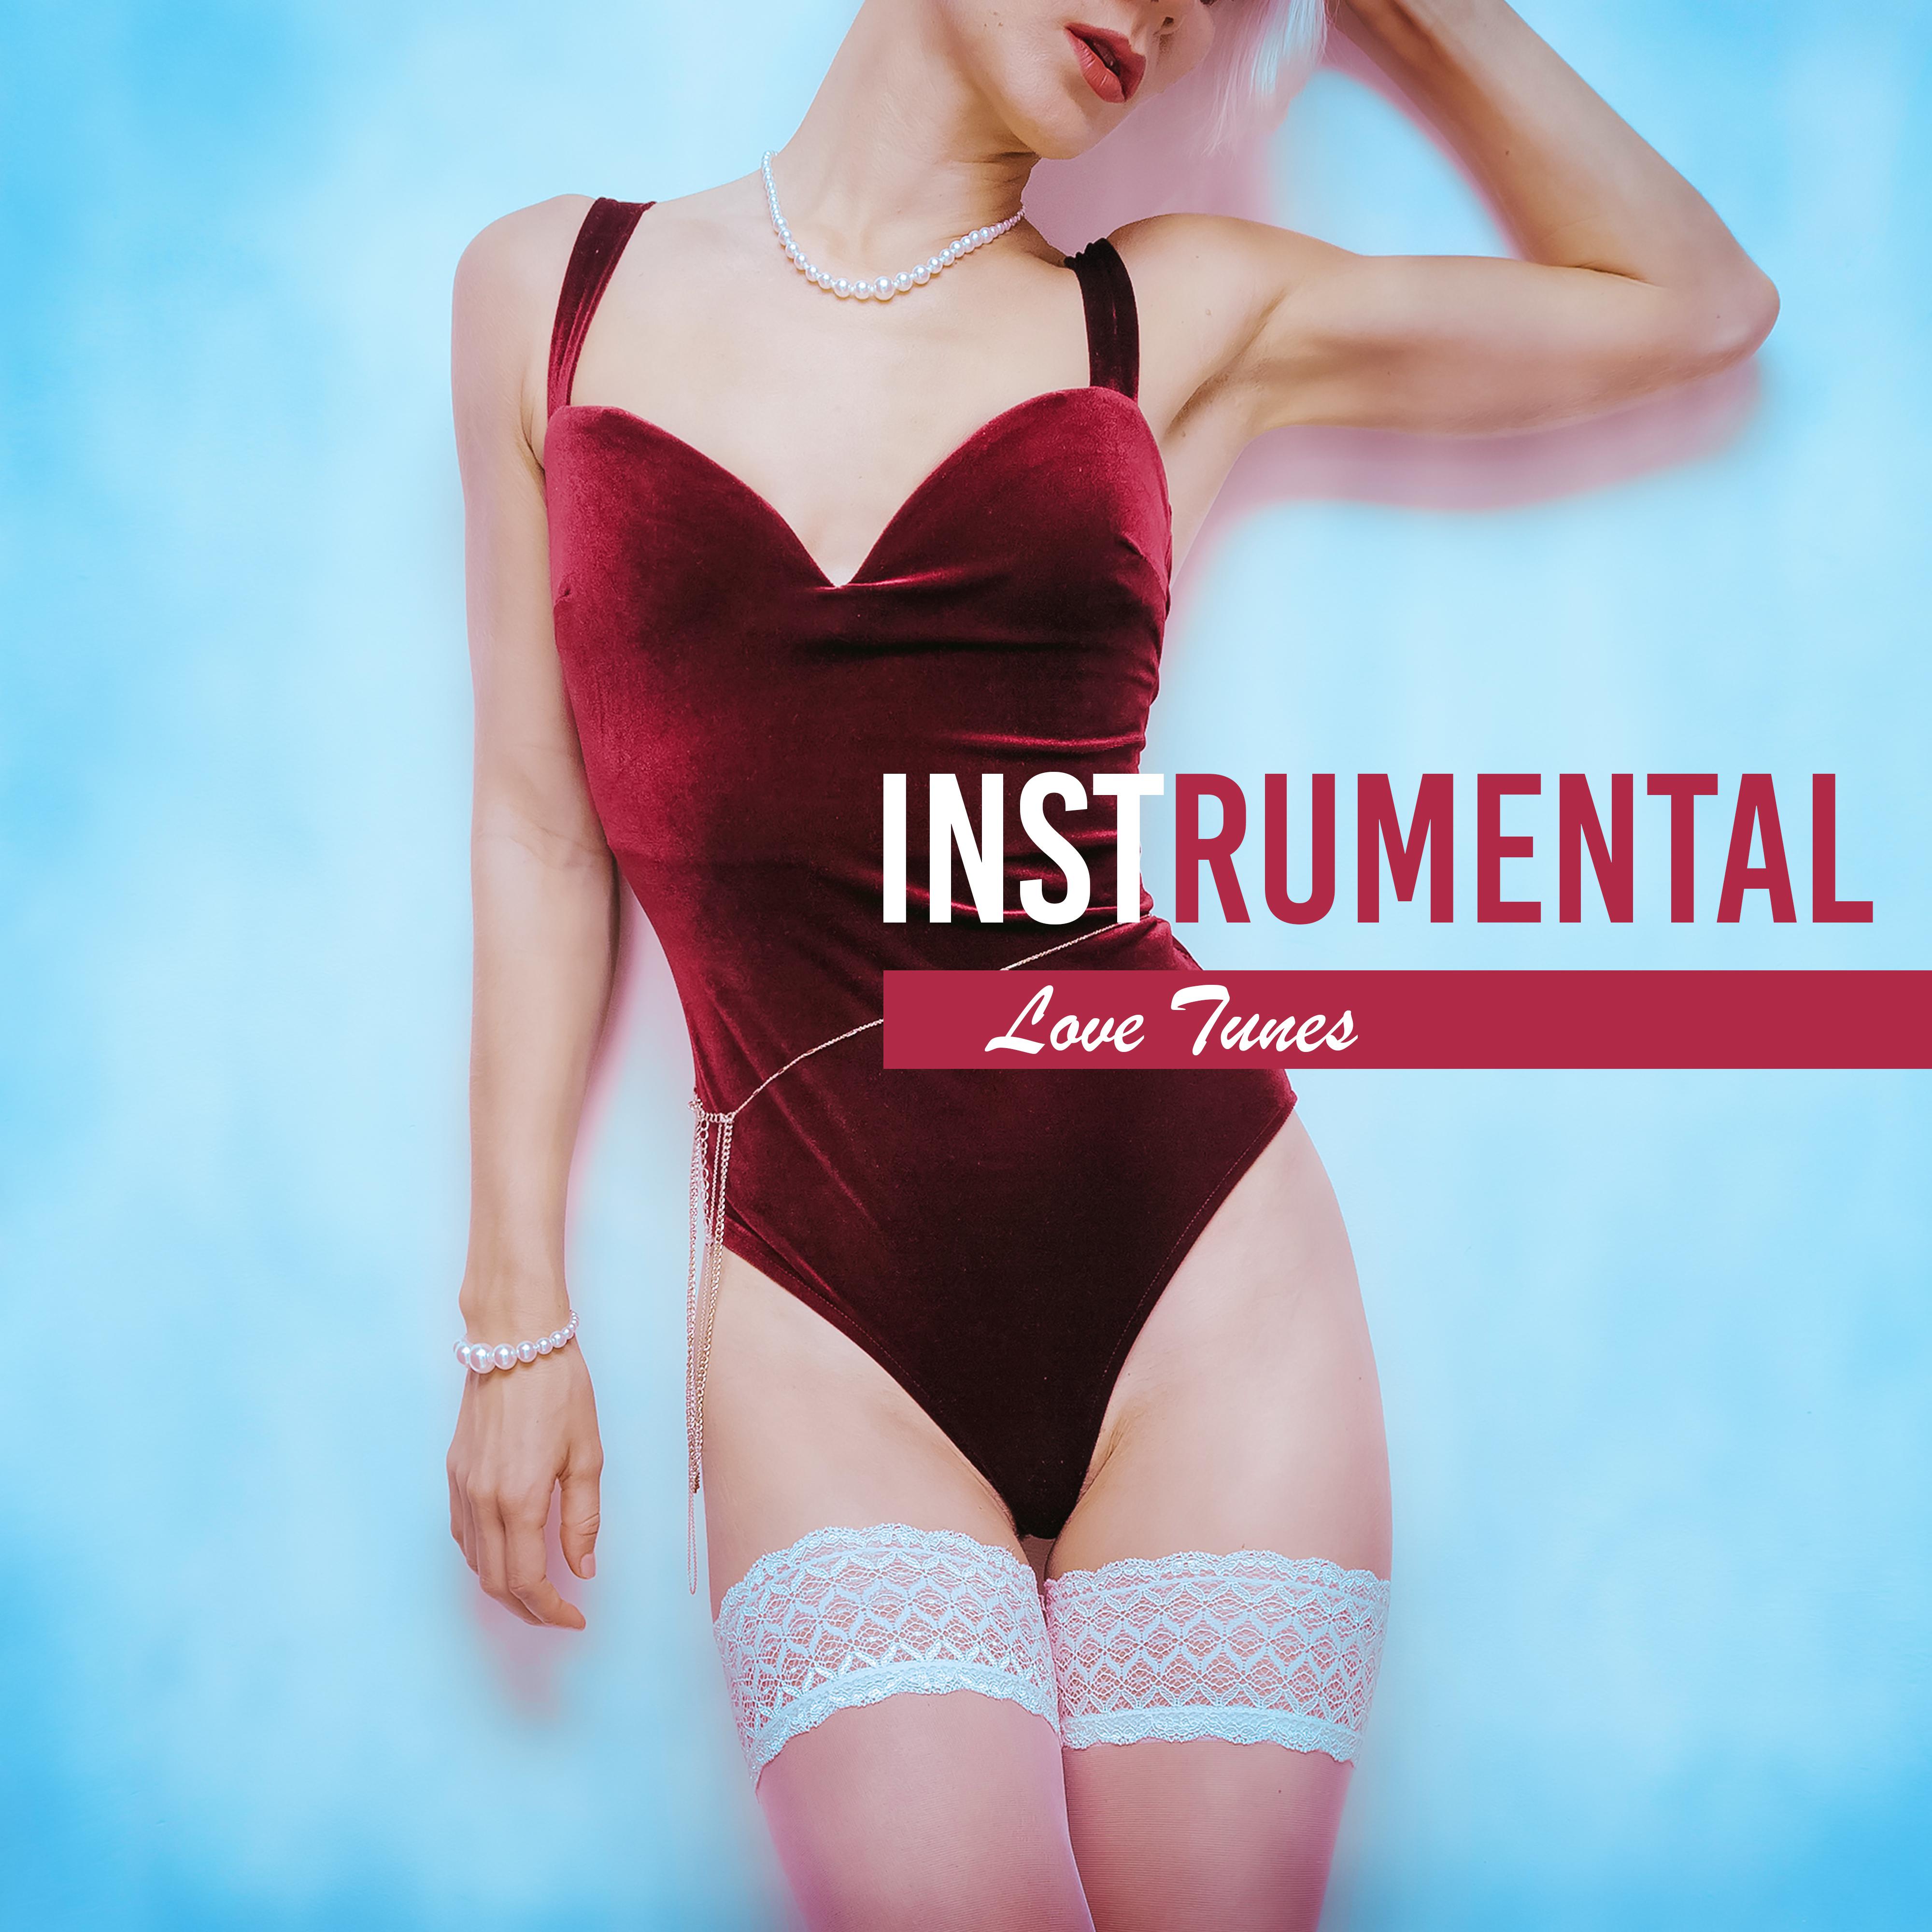 Instrumental Love Tunes - Positive and Joyful Music for Happily Lovers, Romantic Songs for Couples, Songs for an Anniversary or a Romantic Dinner for Two